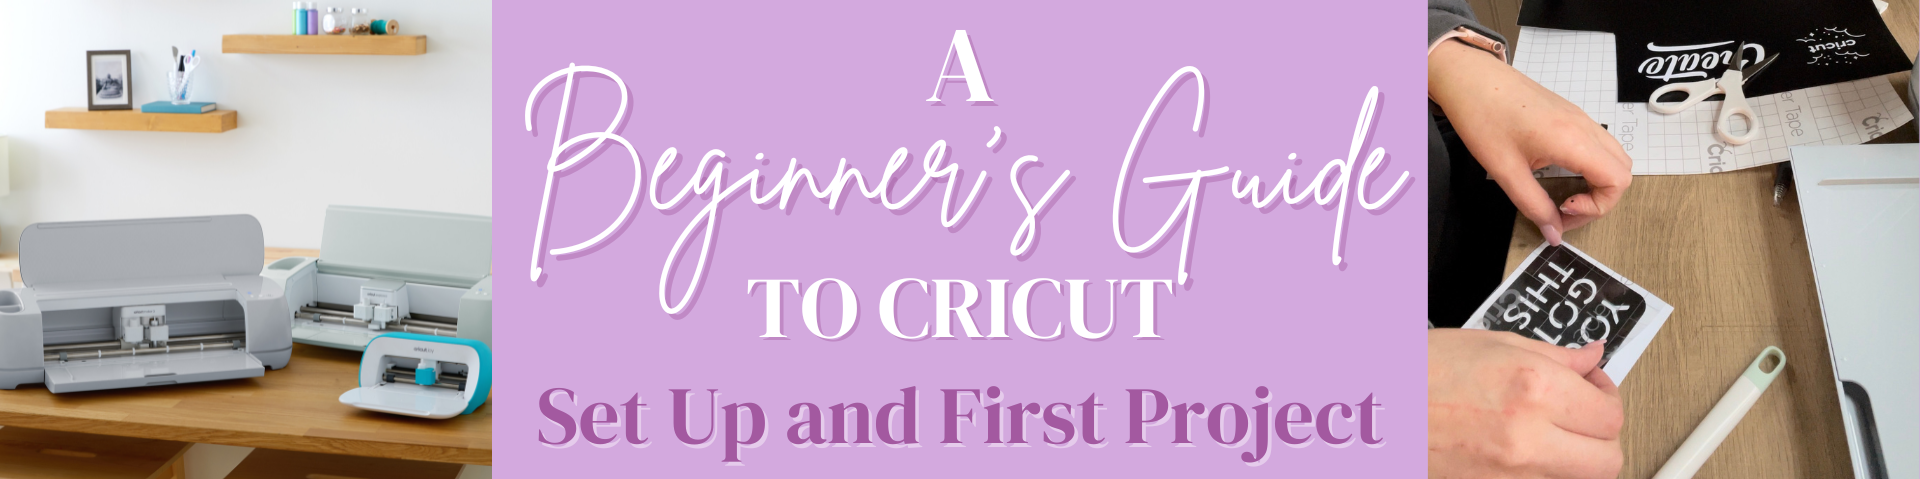 CRICUT EXPLORE 3 FOR BEGINNERS: Step by Step Guide On How to Use Cricut  Explore 3 And Design Space as Novice